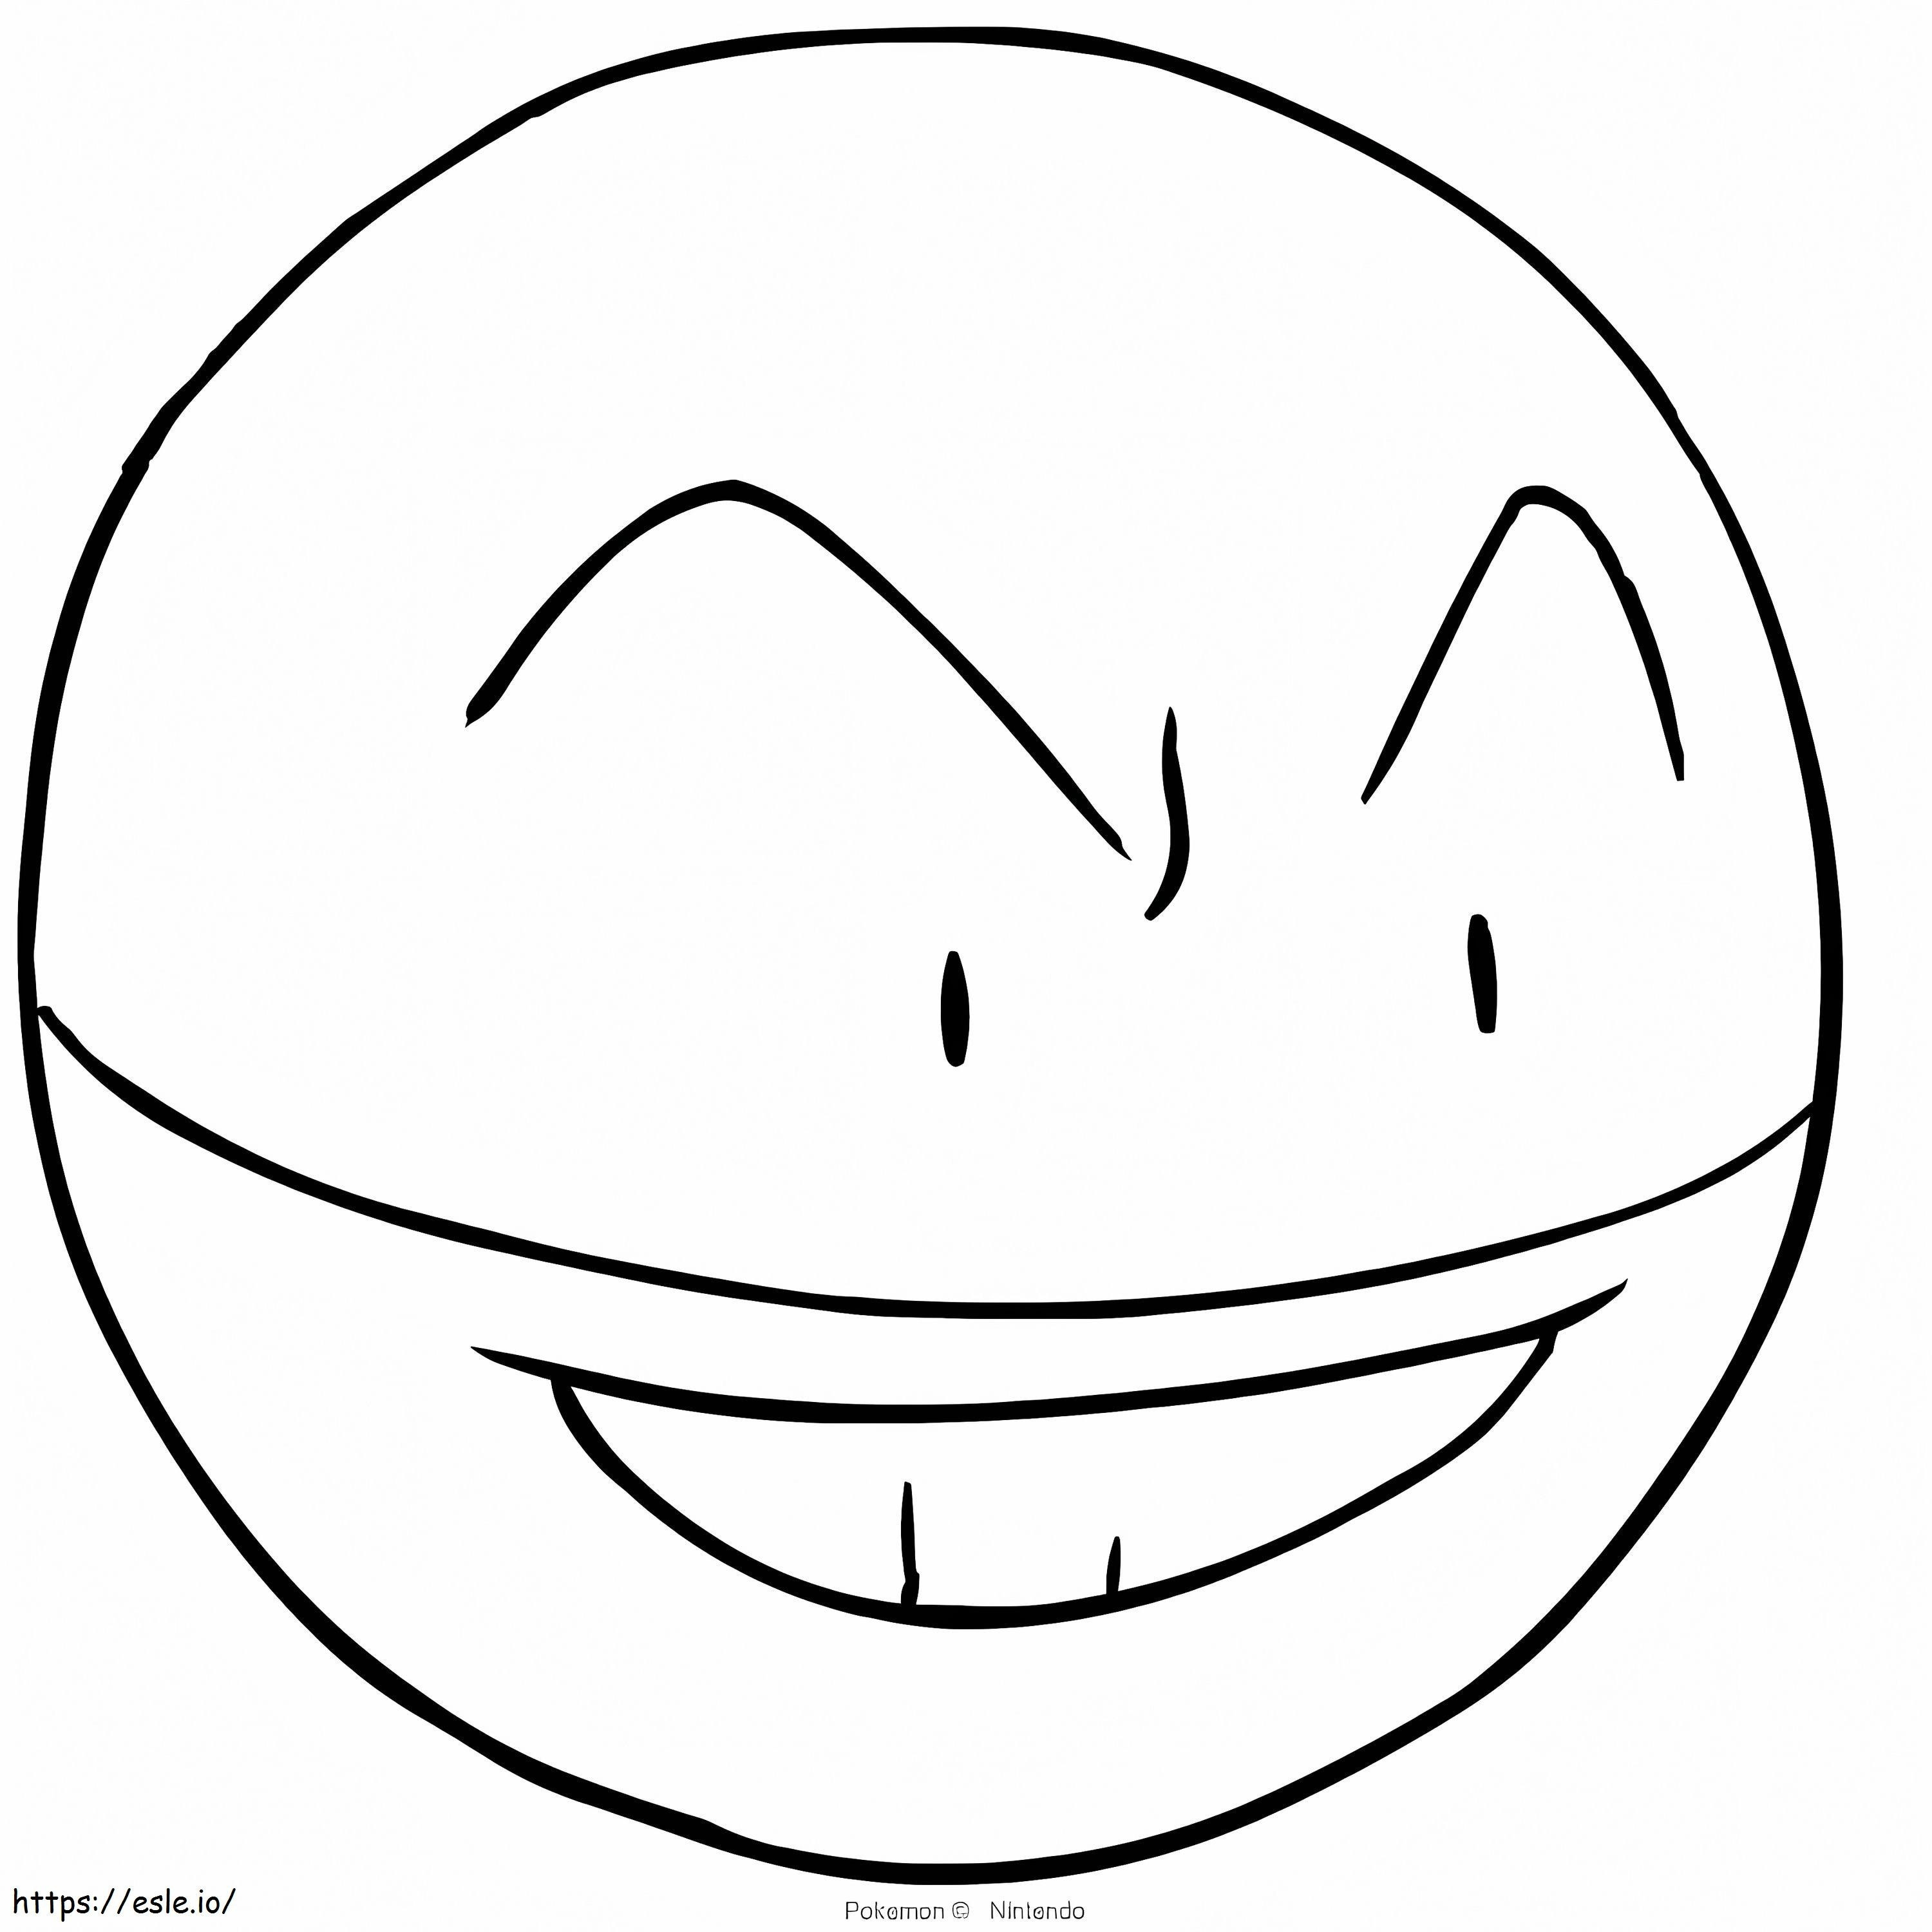 Printable Electrode coloring page